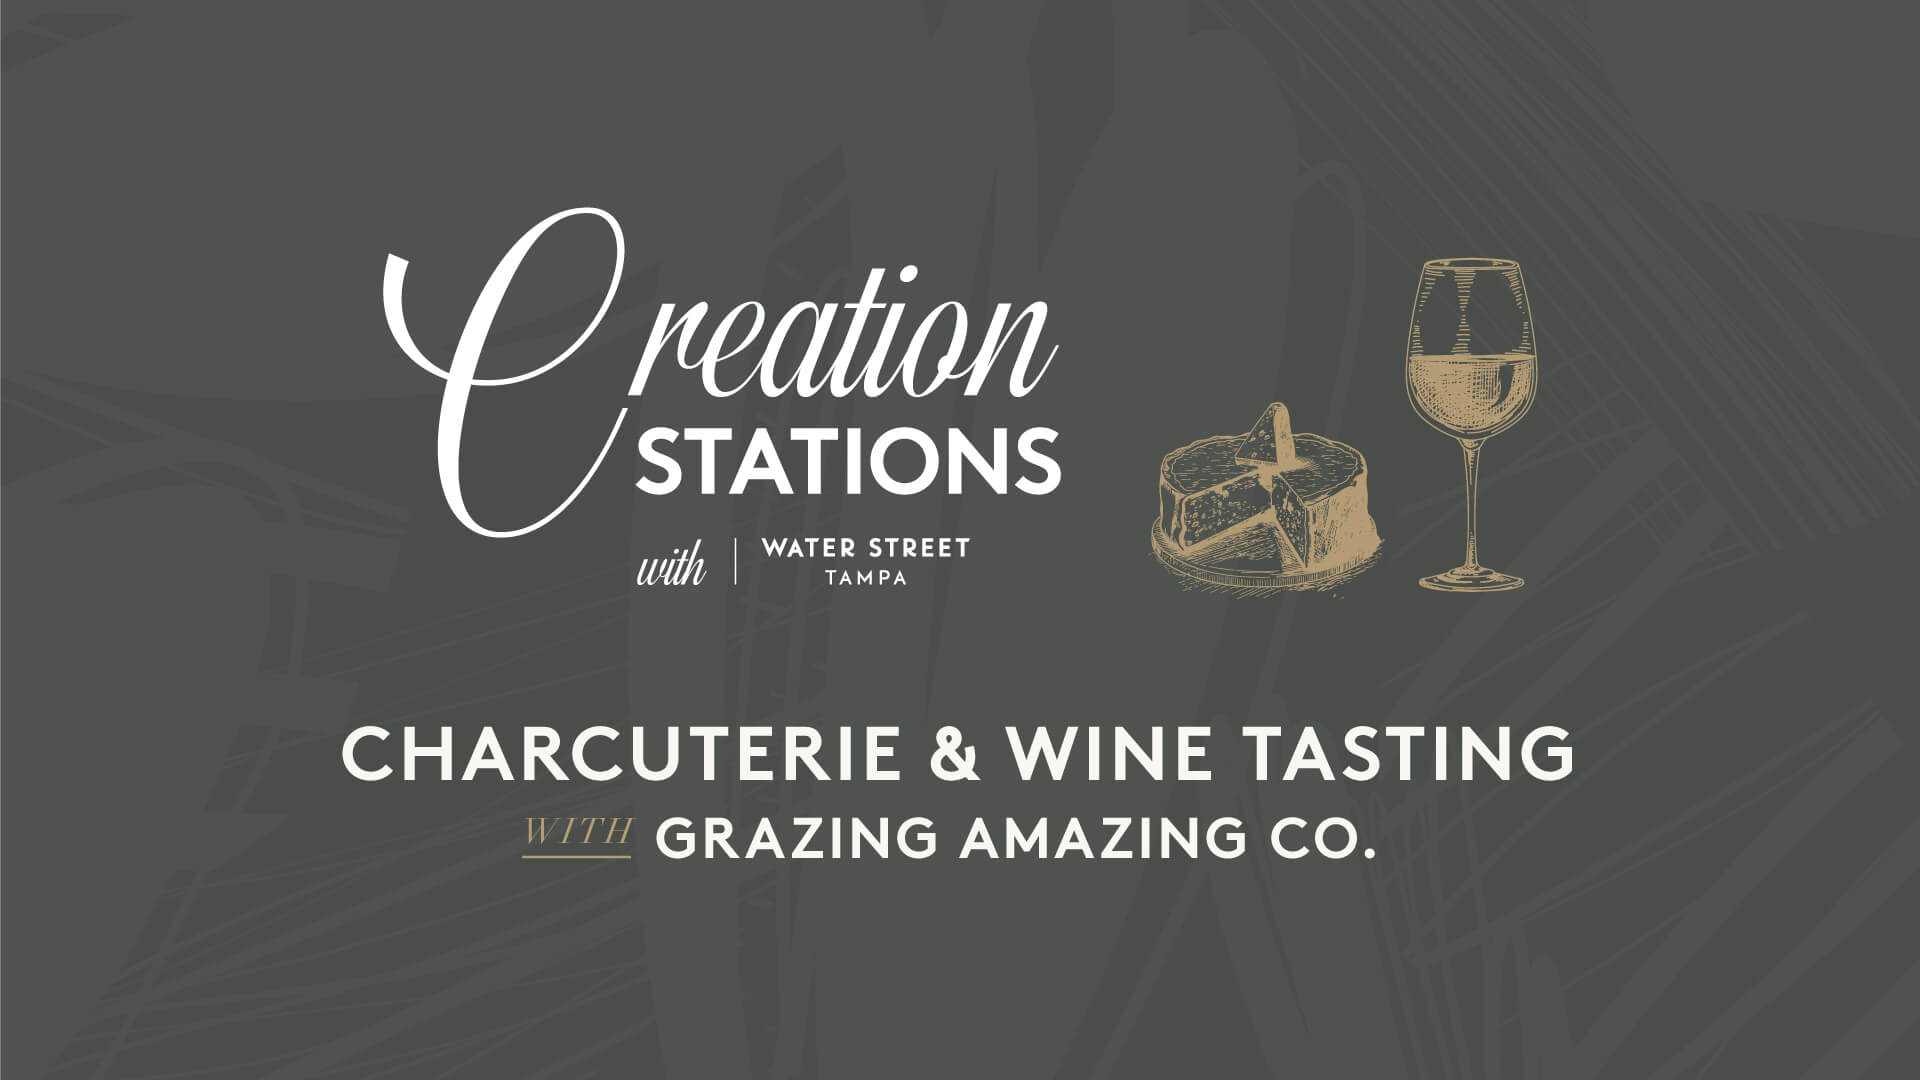 Charcuterie and Wine making charcuterie creation station graphic